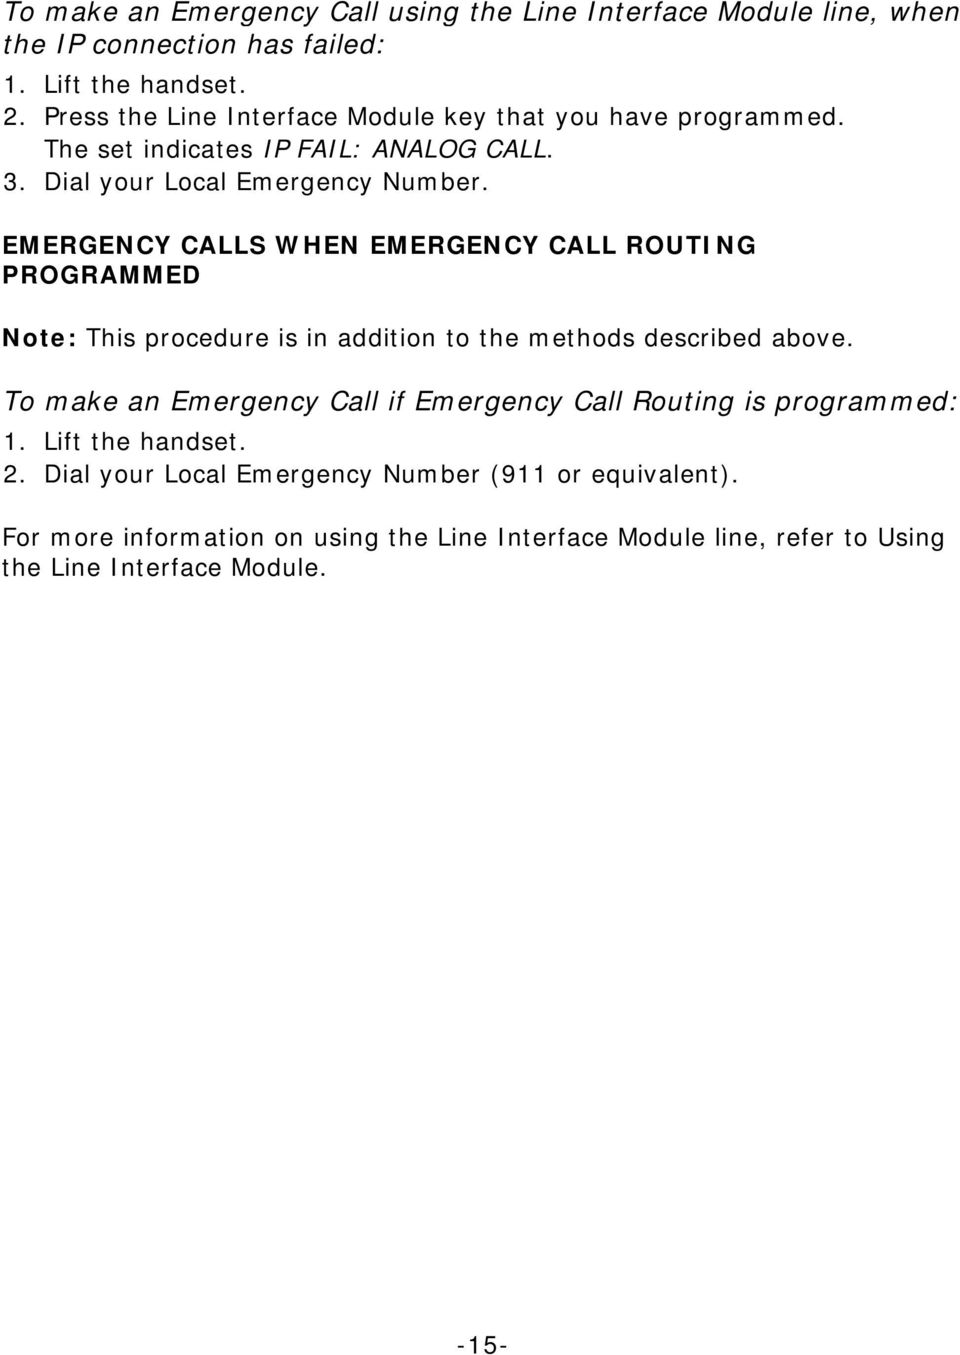 EMERGENCY CALLS WHEN EMERGENCY CALL ROUTING PROGRAMMED Note: This procedure is in addition to the methods described above.